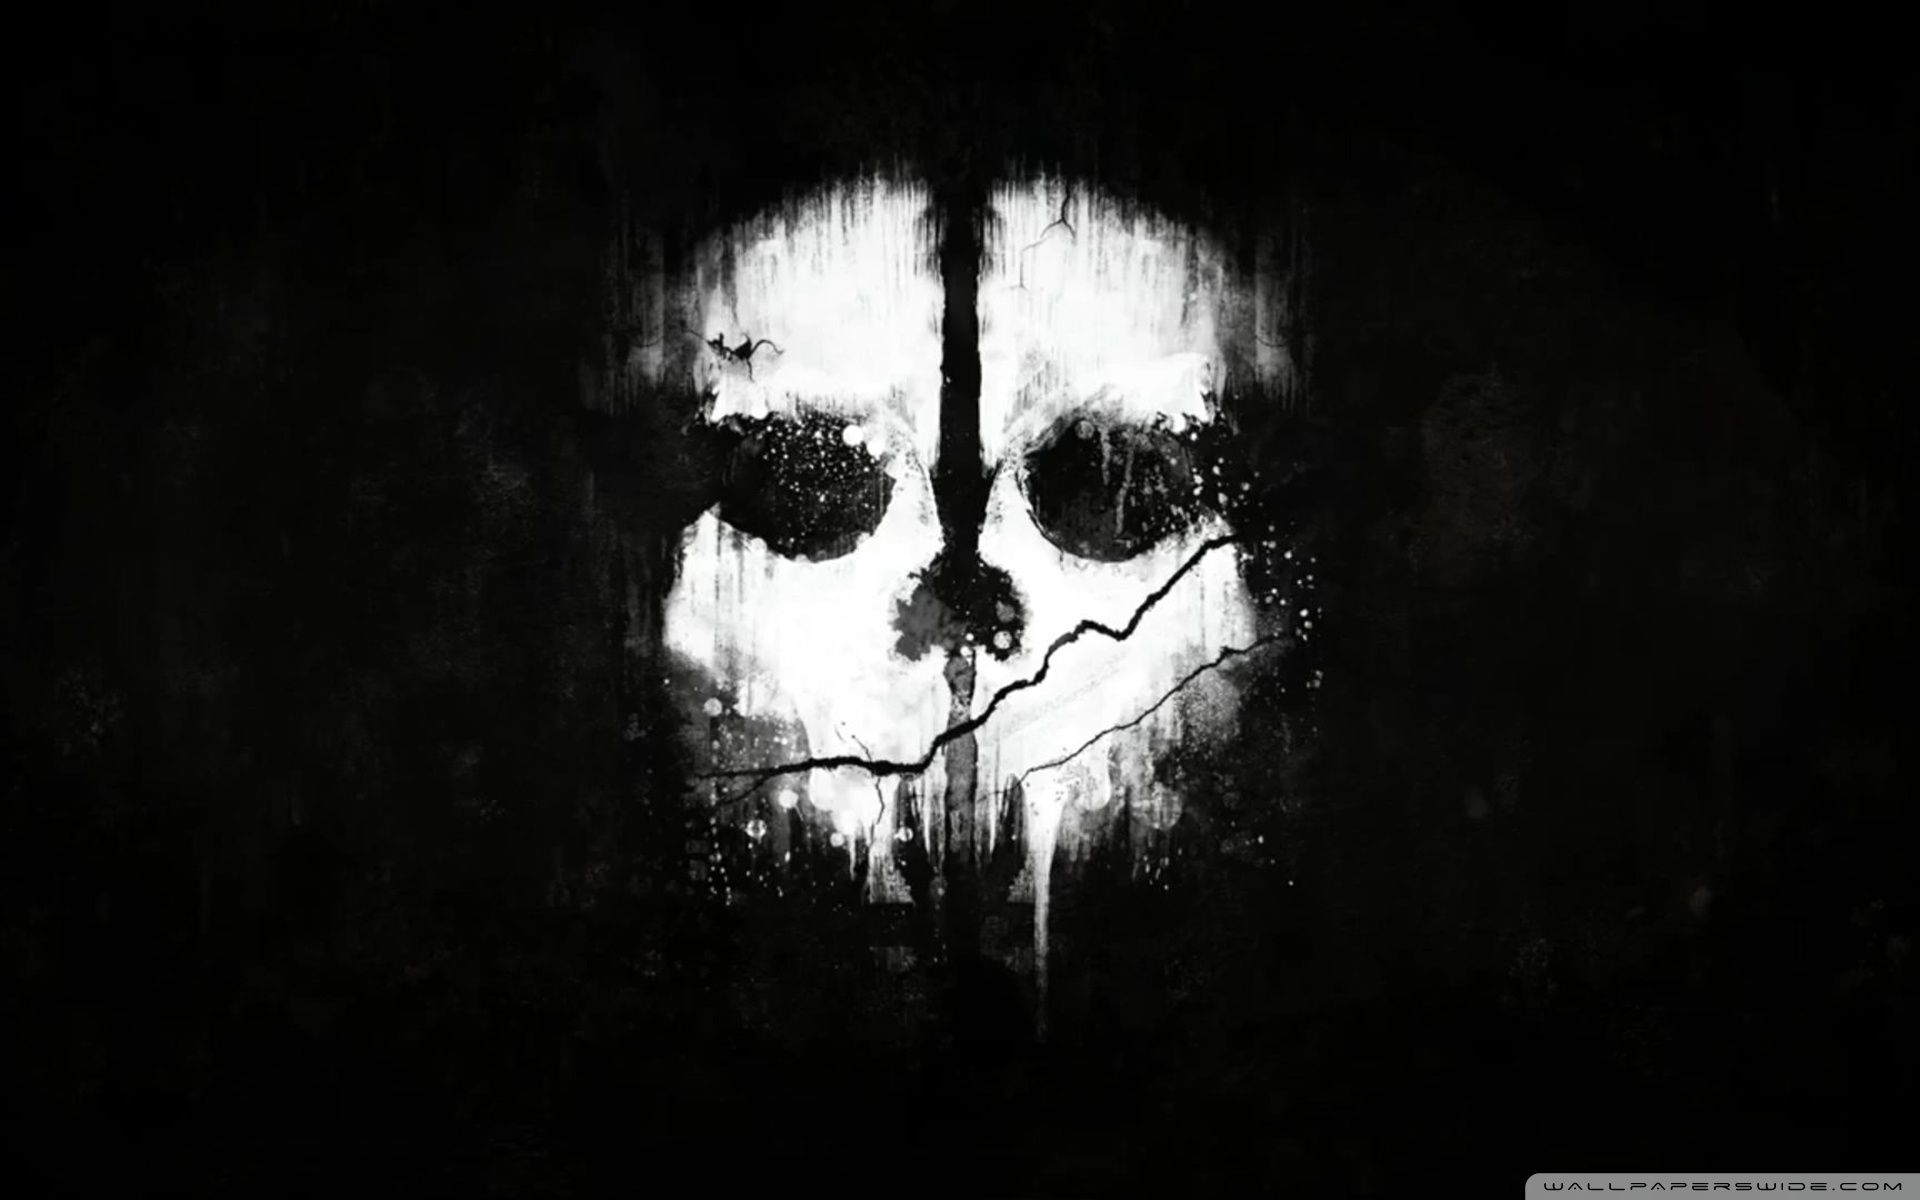 Cool Call Of Duty Ghosts wallpaper | 1920x1200 | #25395